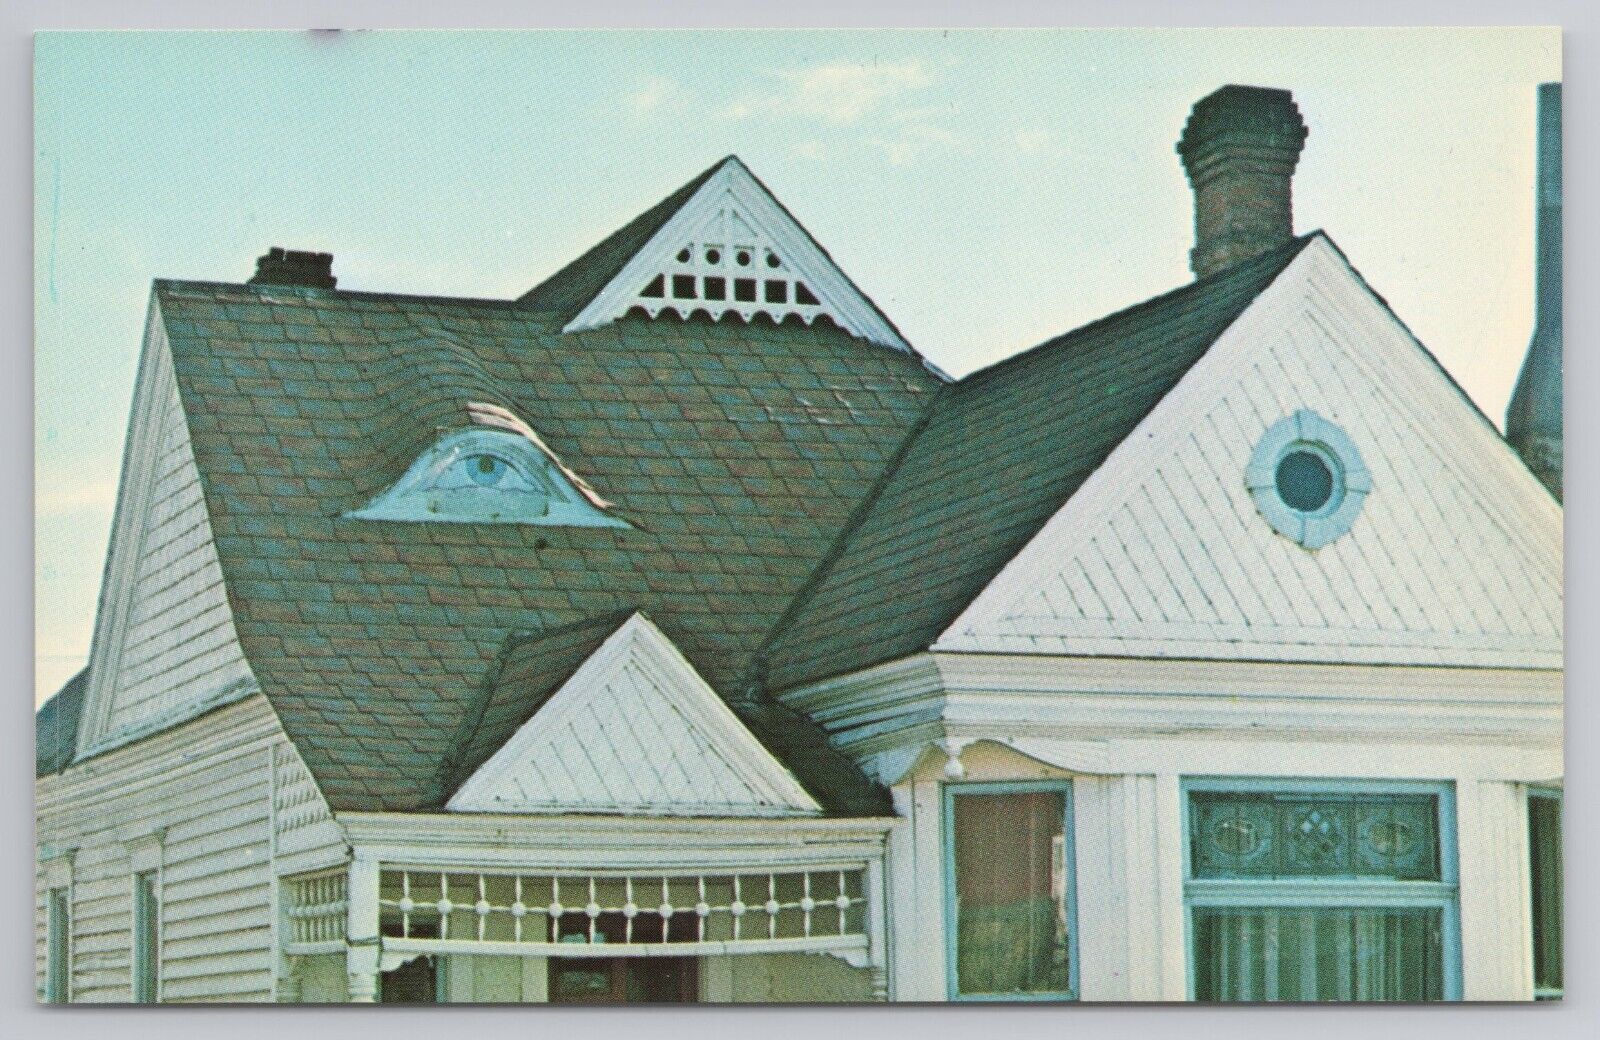 The House With The Eye Leadville Colorado Unique Roof Design Vintage Postcard